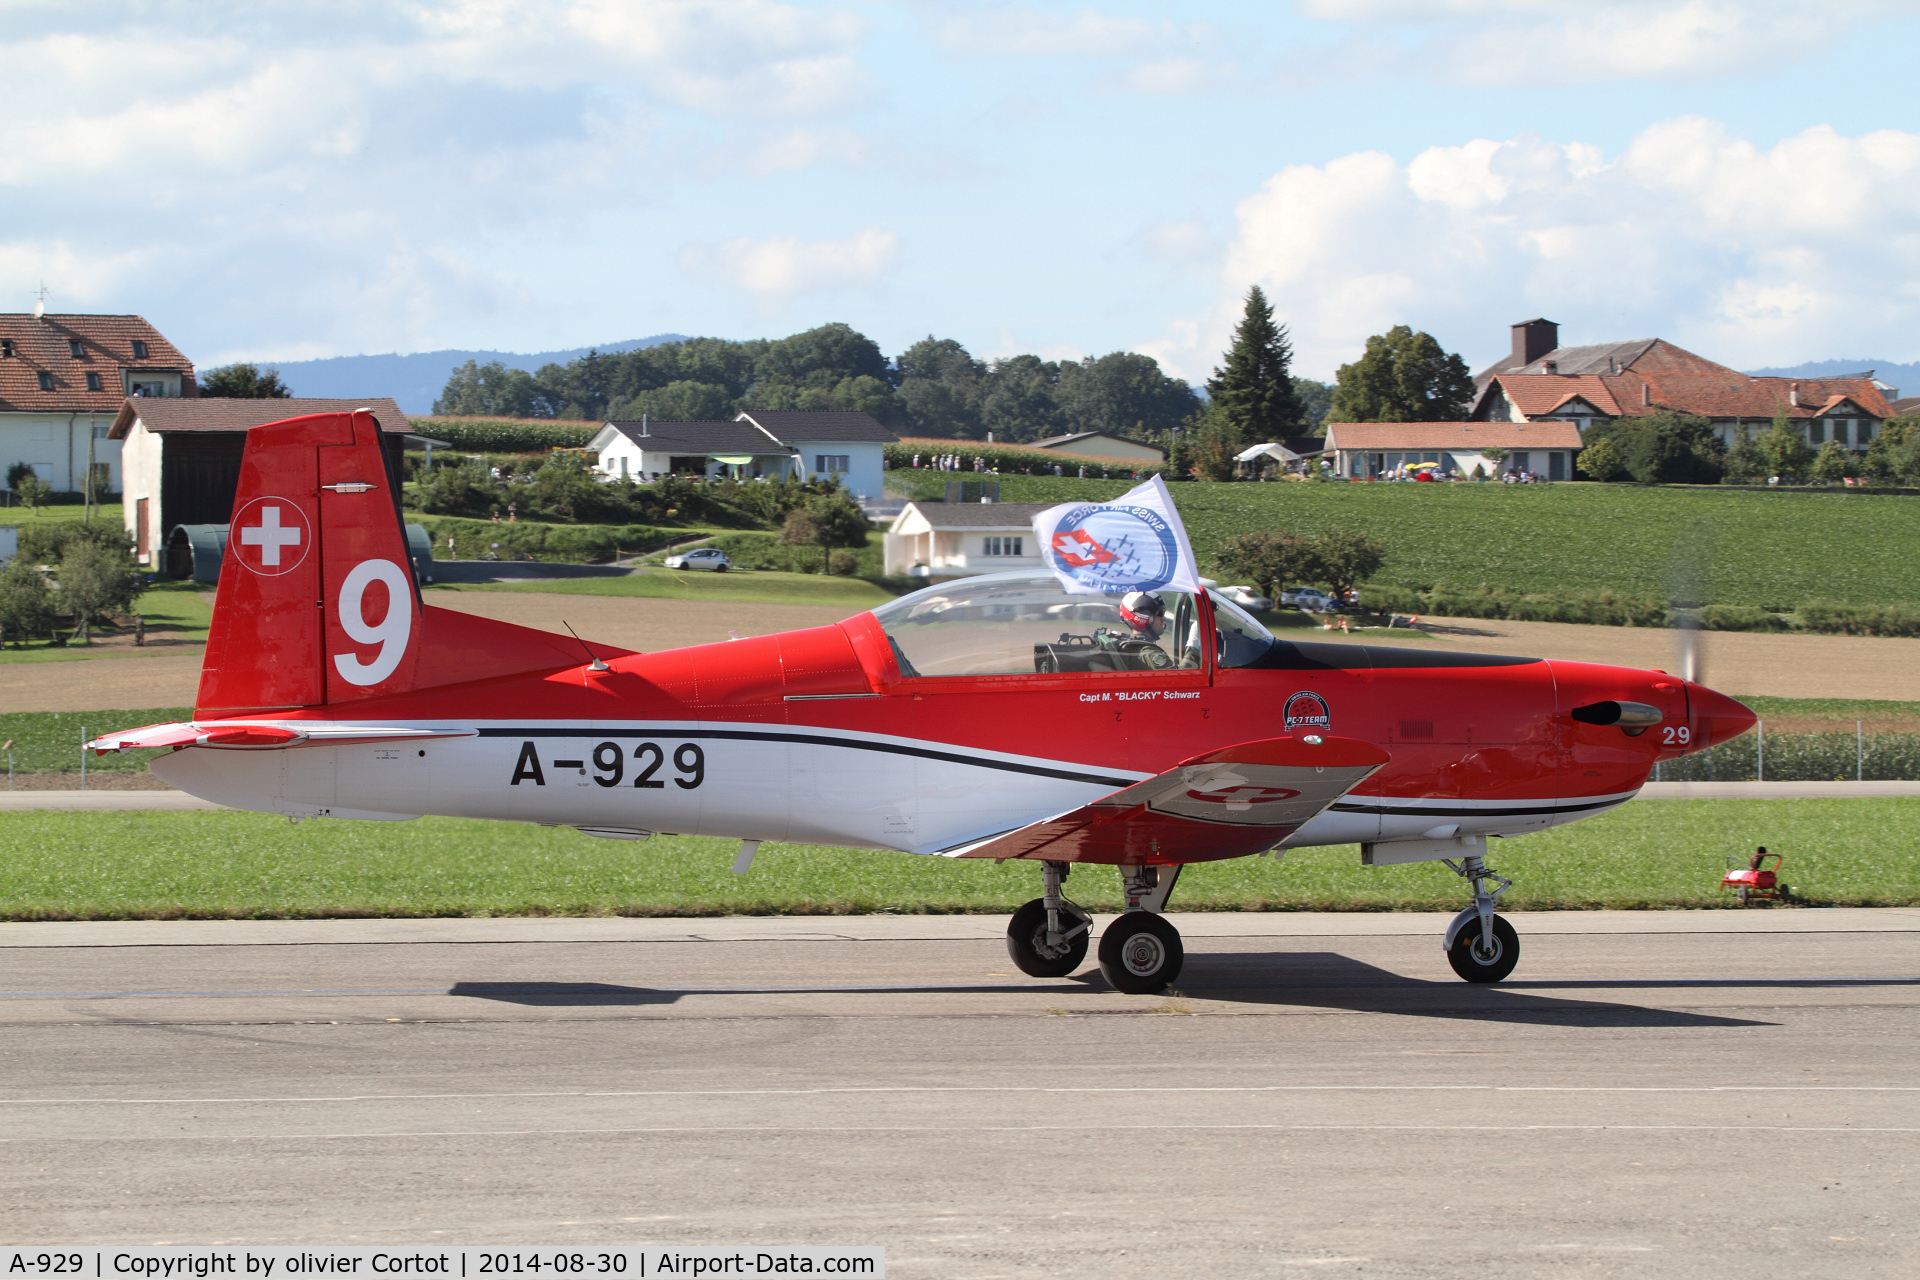 A-929, 1983 Pilatus PC-7 Turbo Trainer C/N 337, with a flag of the team, Air 14